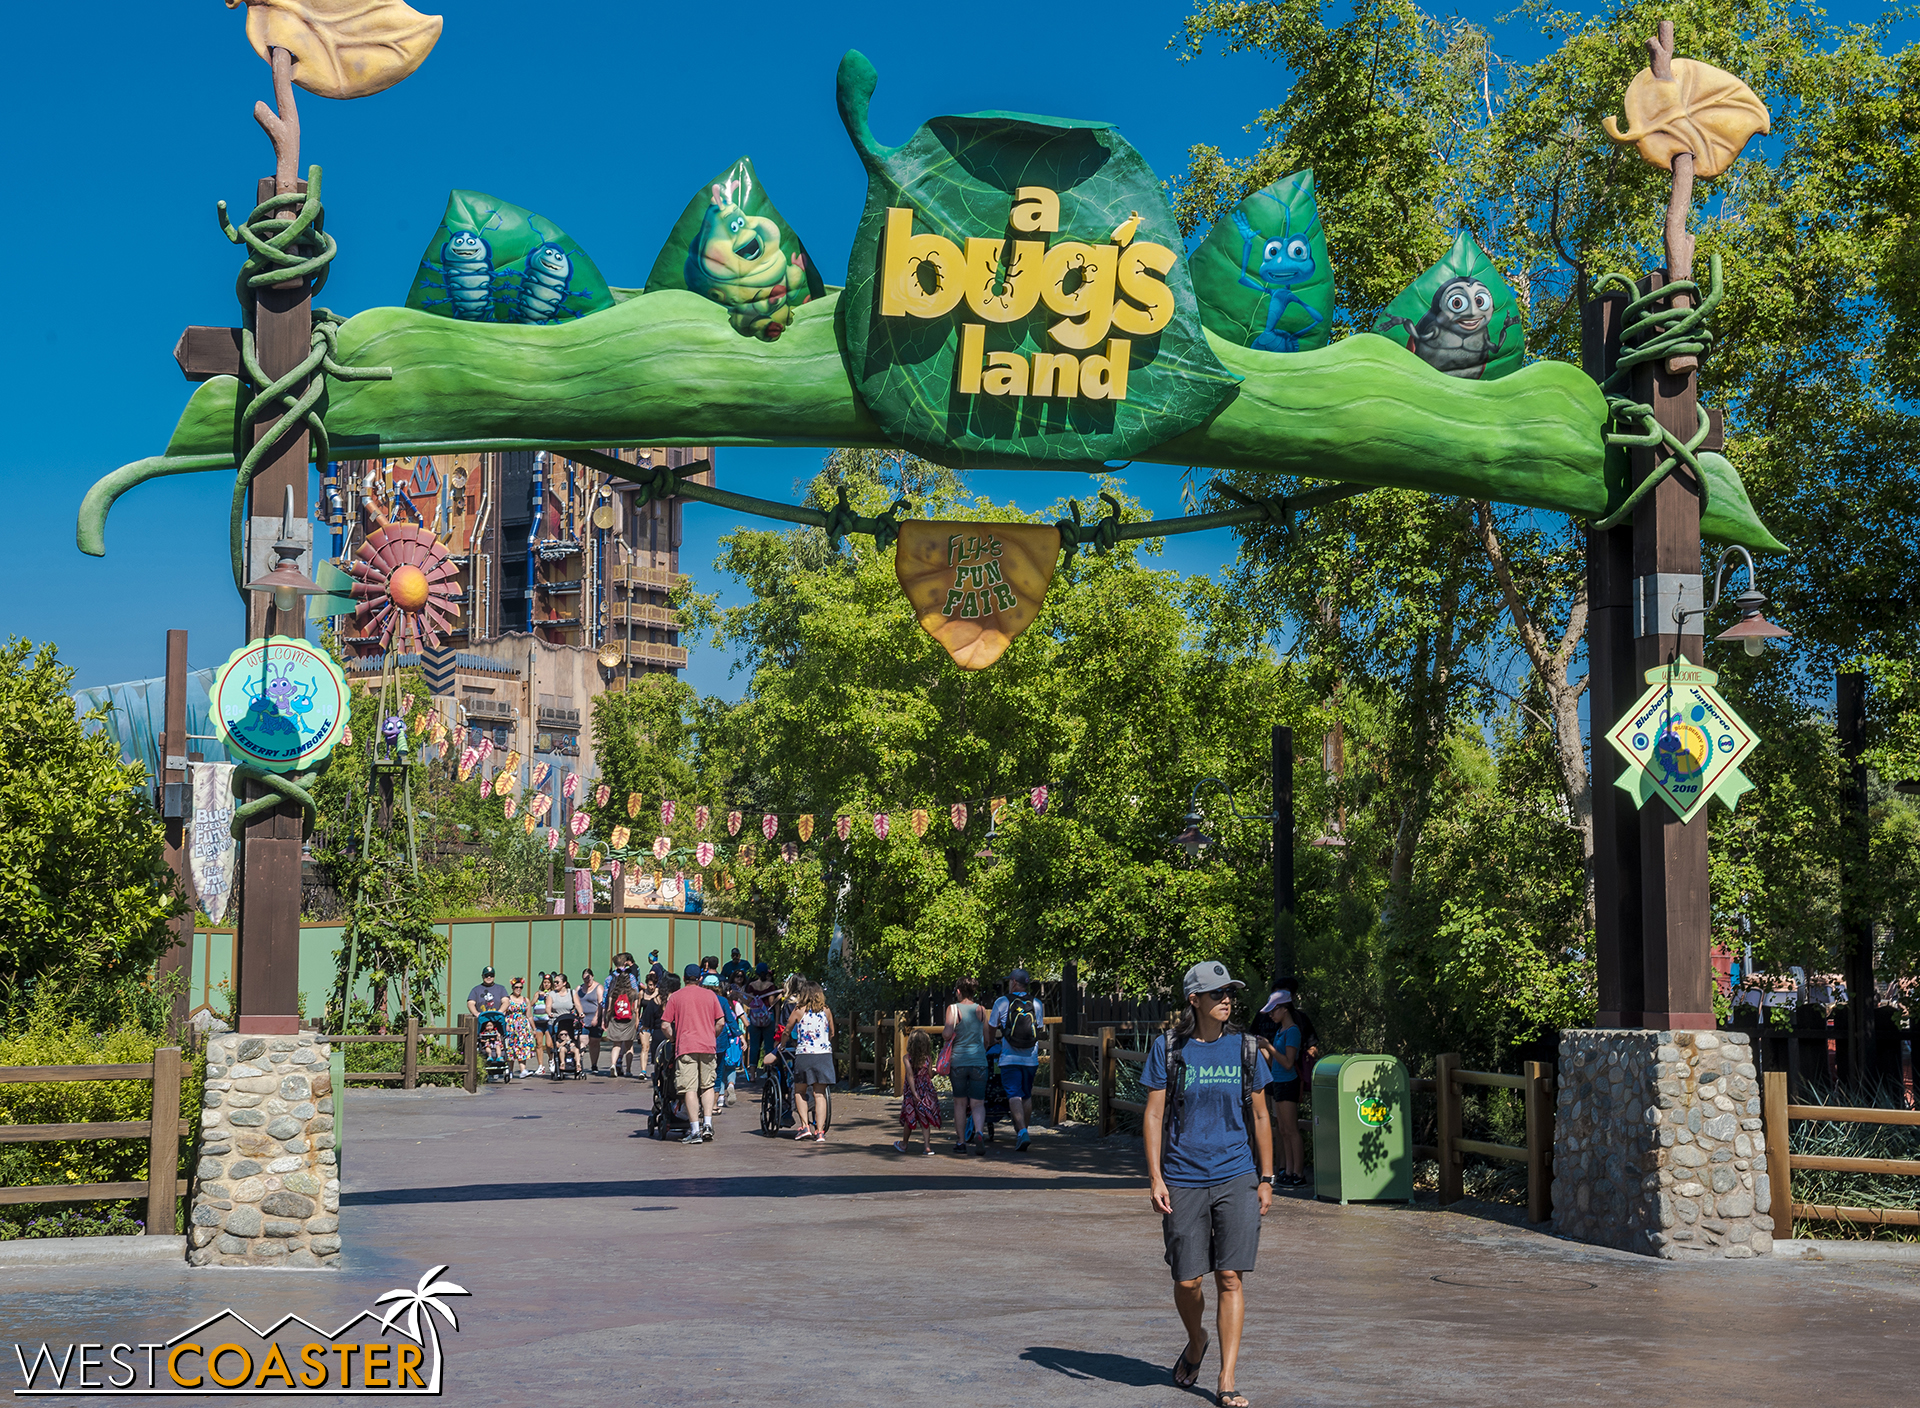  A Bug’s Land  will close after September 4th .  You have until Labor Day weekend to enjoy it.  And by you, I mean your kids dragging you to one of the few places in DCA with rides oriented to young children. 